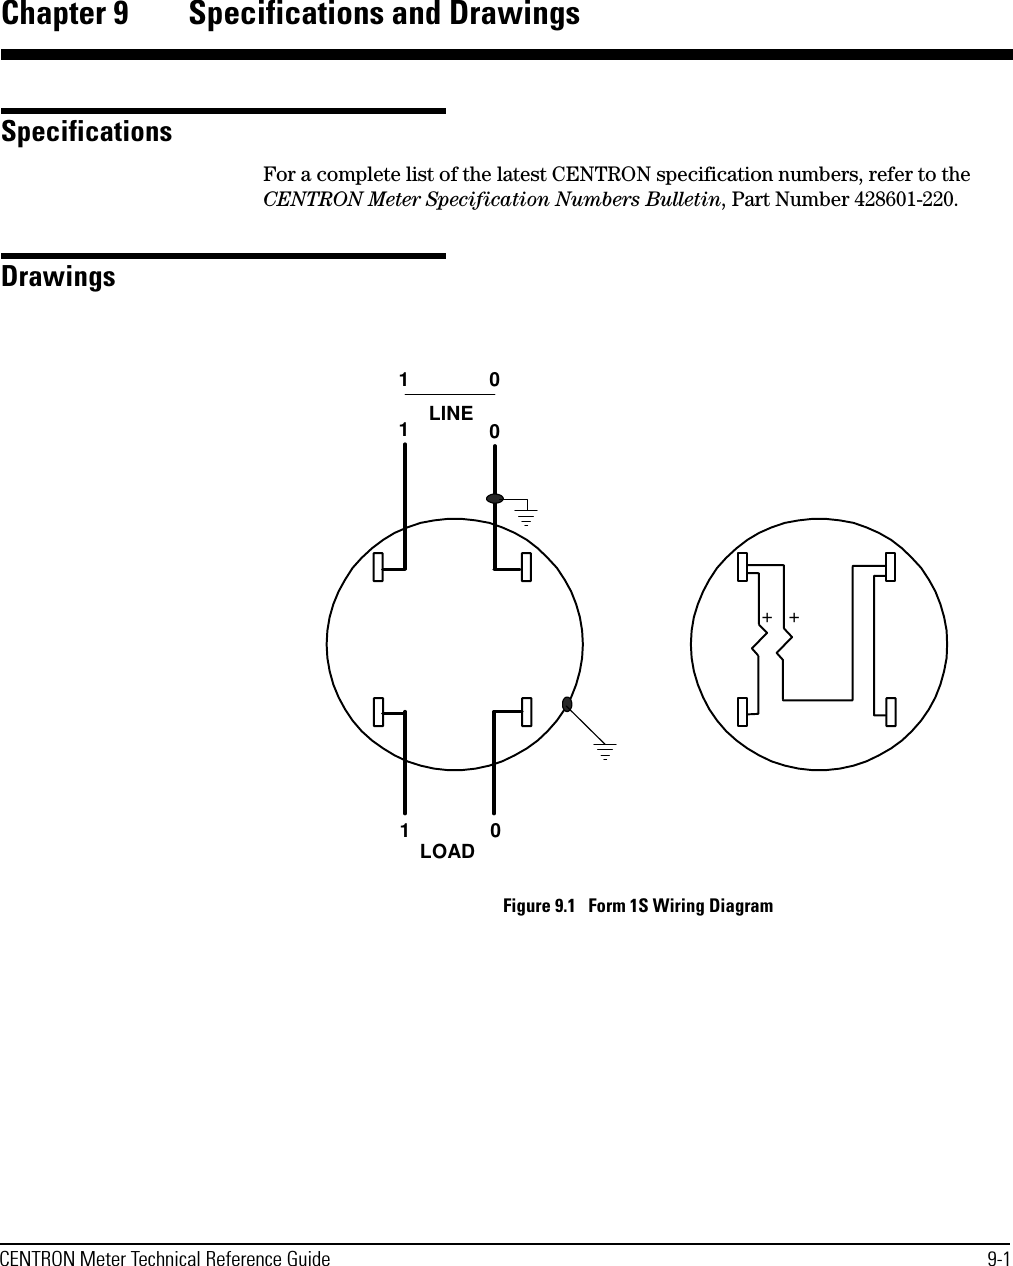 CENTRON Meter Technical Reference Guide 9-1Chapter 9 Specifications and DrawingsSpecificationsFor a complete list of the latest CENTRON specification numbers, refer to the CENTRON Meter Specification Numbers Bulletin, Part Number 428601-220.DrawingsFigure 9.1   Form 1S Wiring Diagram110010LINE++LOAD